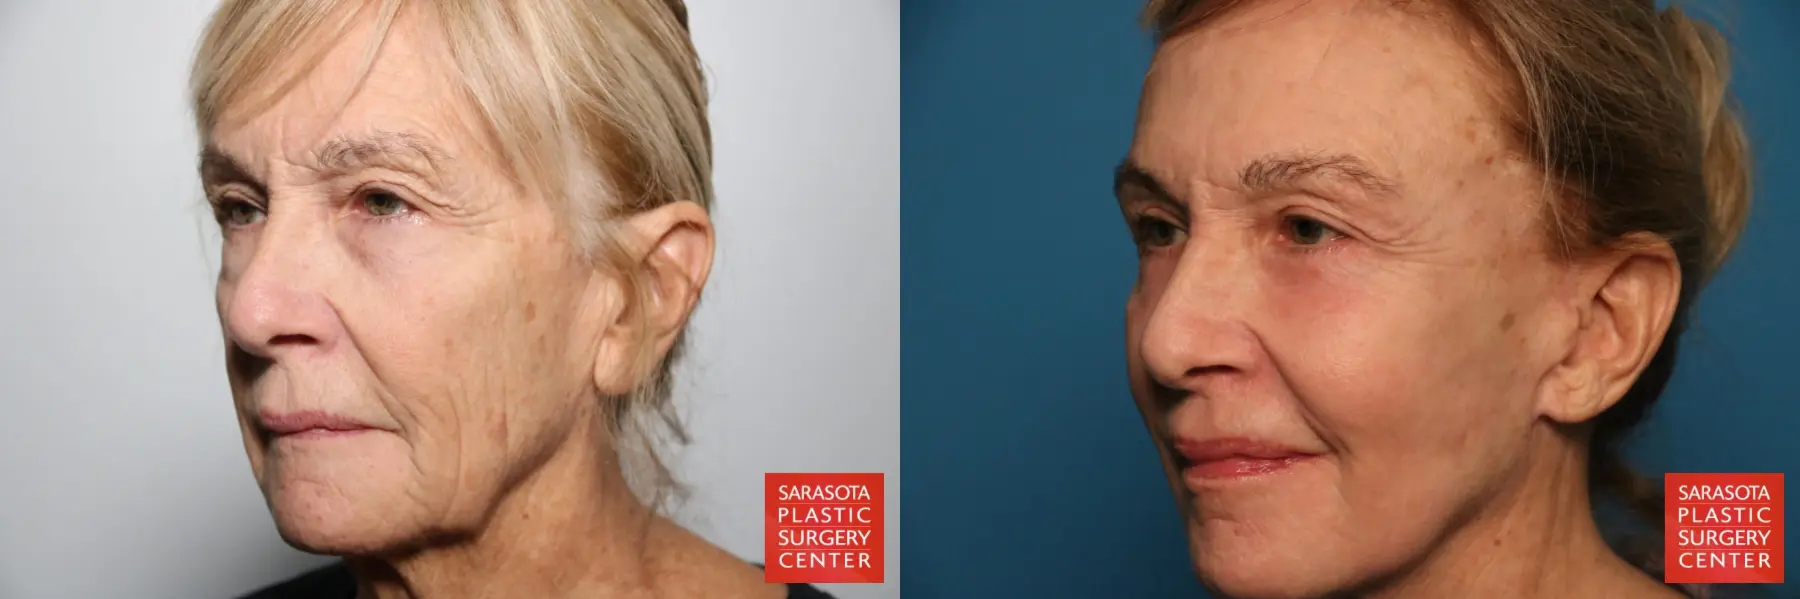 Otoplasty And Earlobe Repair: Patient 2 - Before and After 2